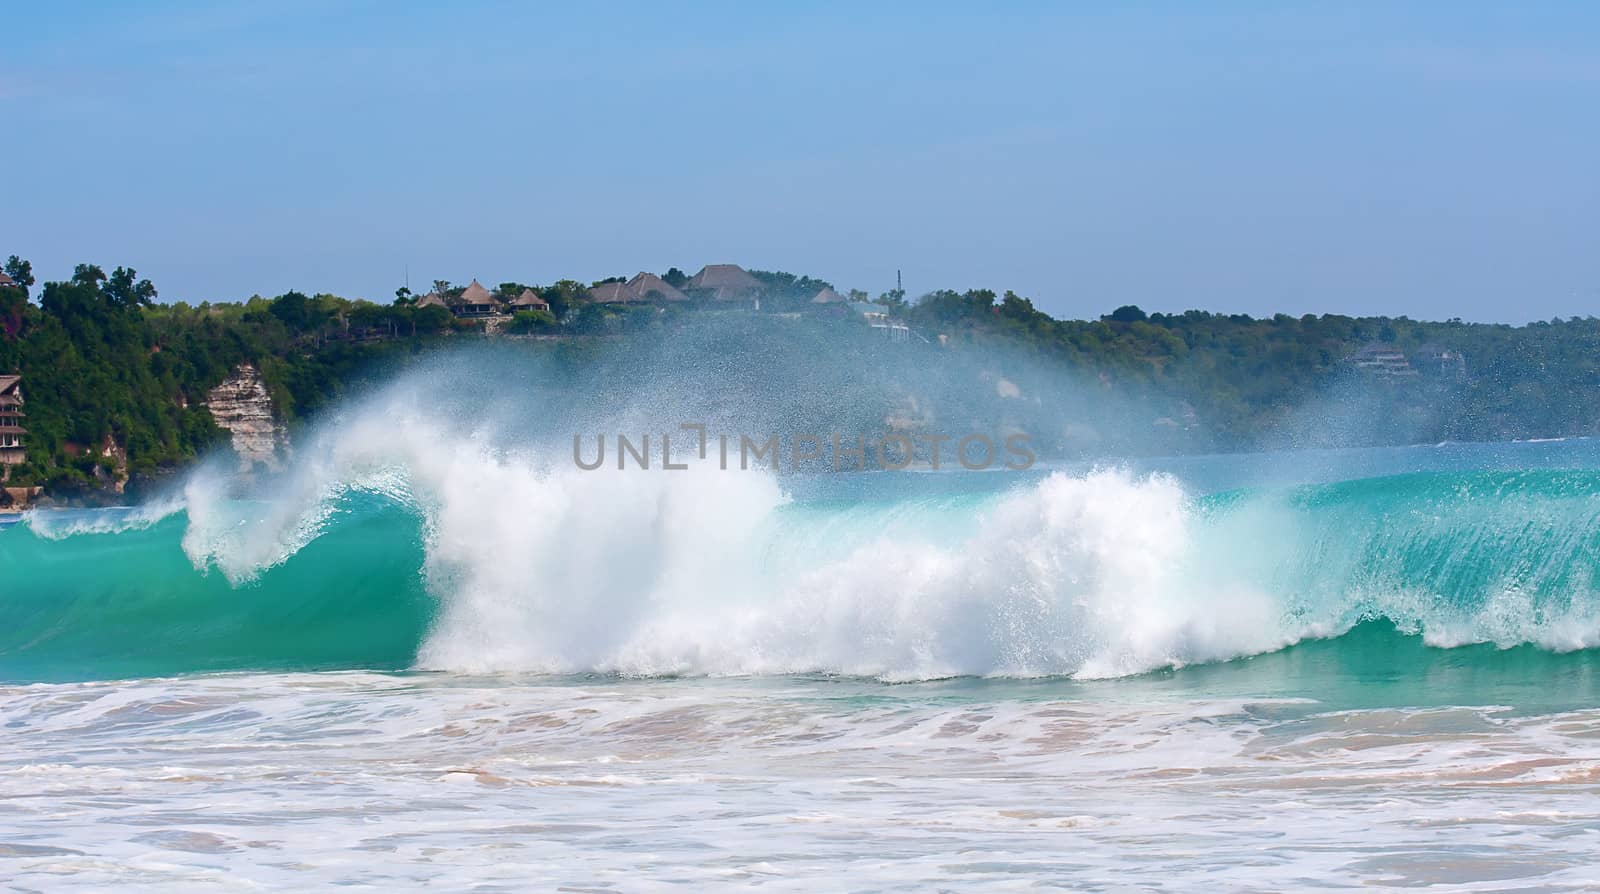  beautiful balinese Dreamland beach (One of the most popular surfing areas on Bali, Indonesia)